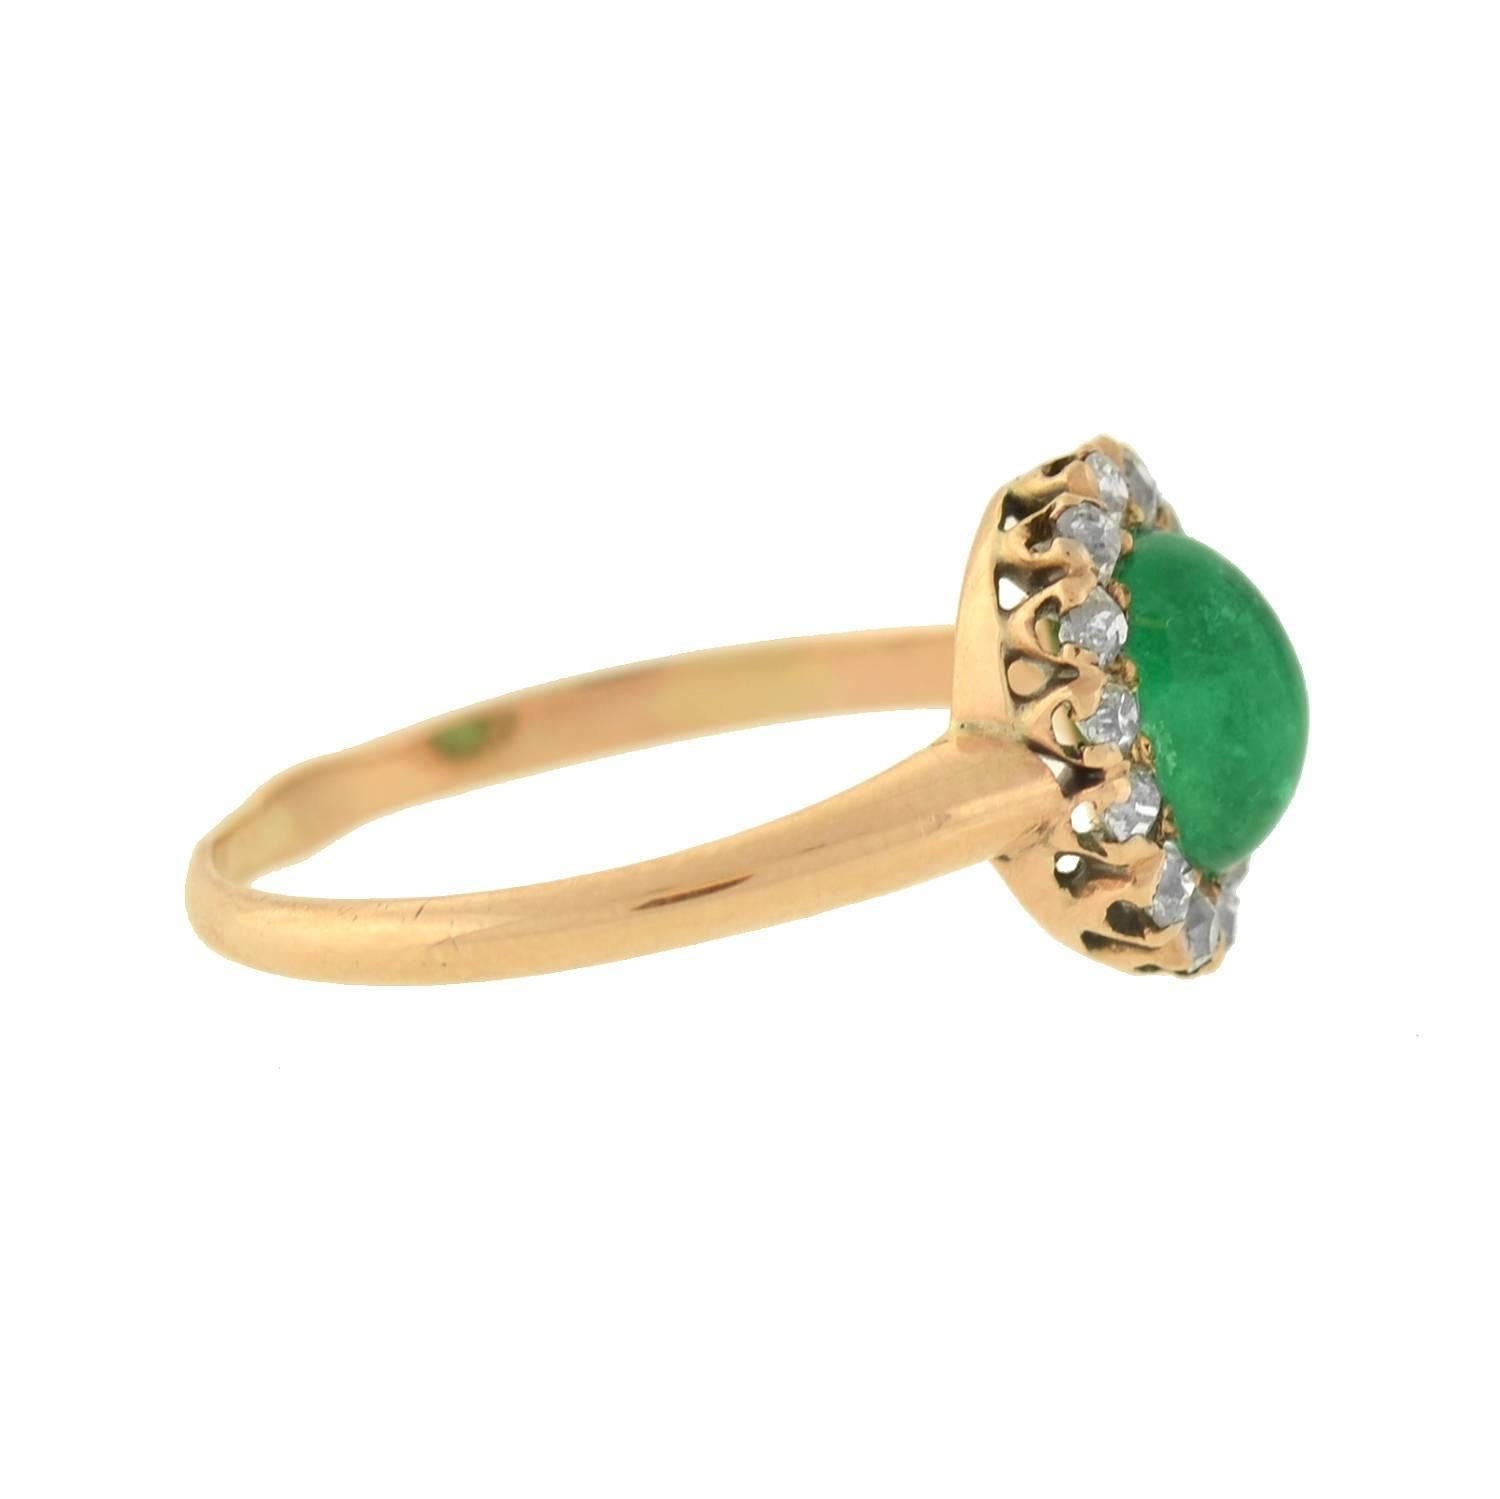 A beautiful emerald and diamond ring from the early (ca1920) Art Deco era! This ring is of Russian origin, and has a petite and feminine design crafted in 14kt gold. At the center is a luscious emerald cabochon, which is surrounded by a border of